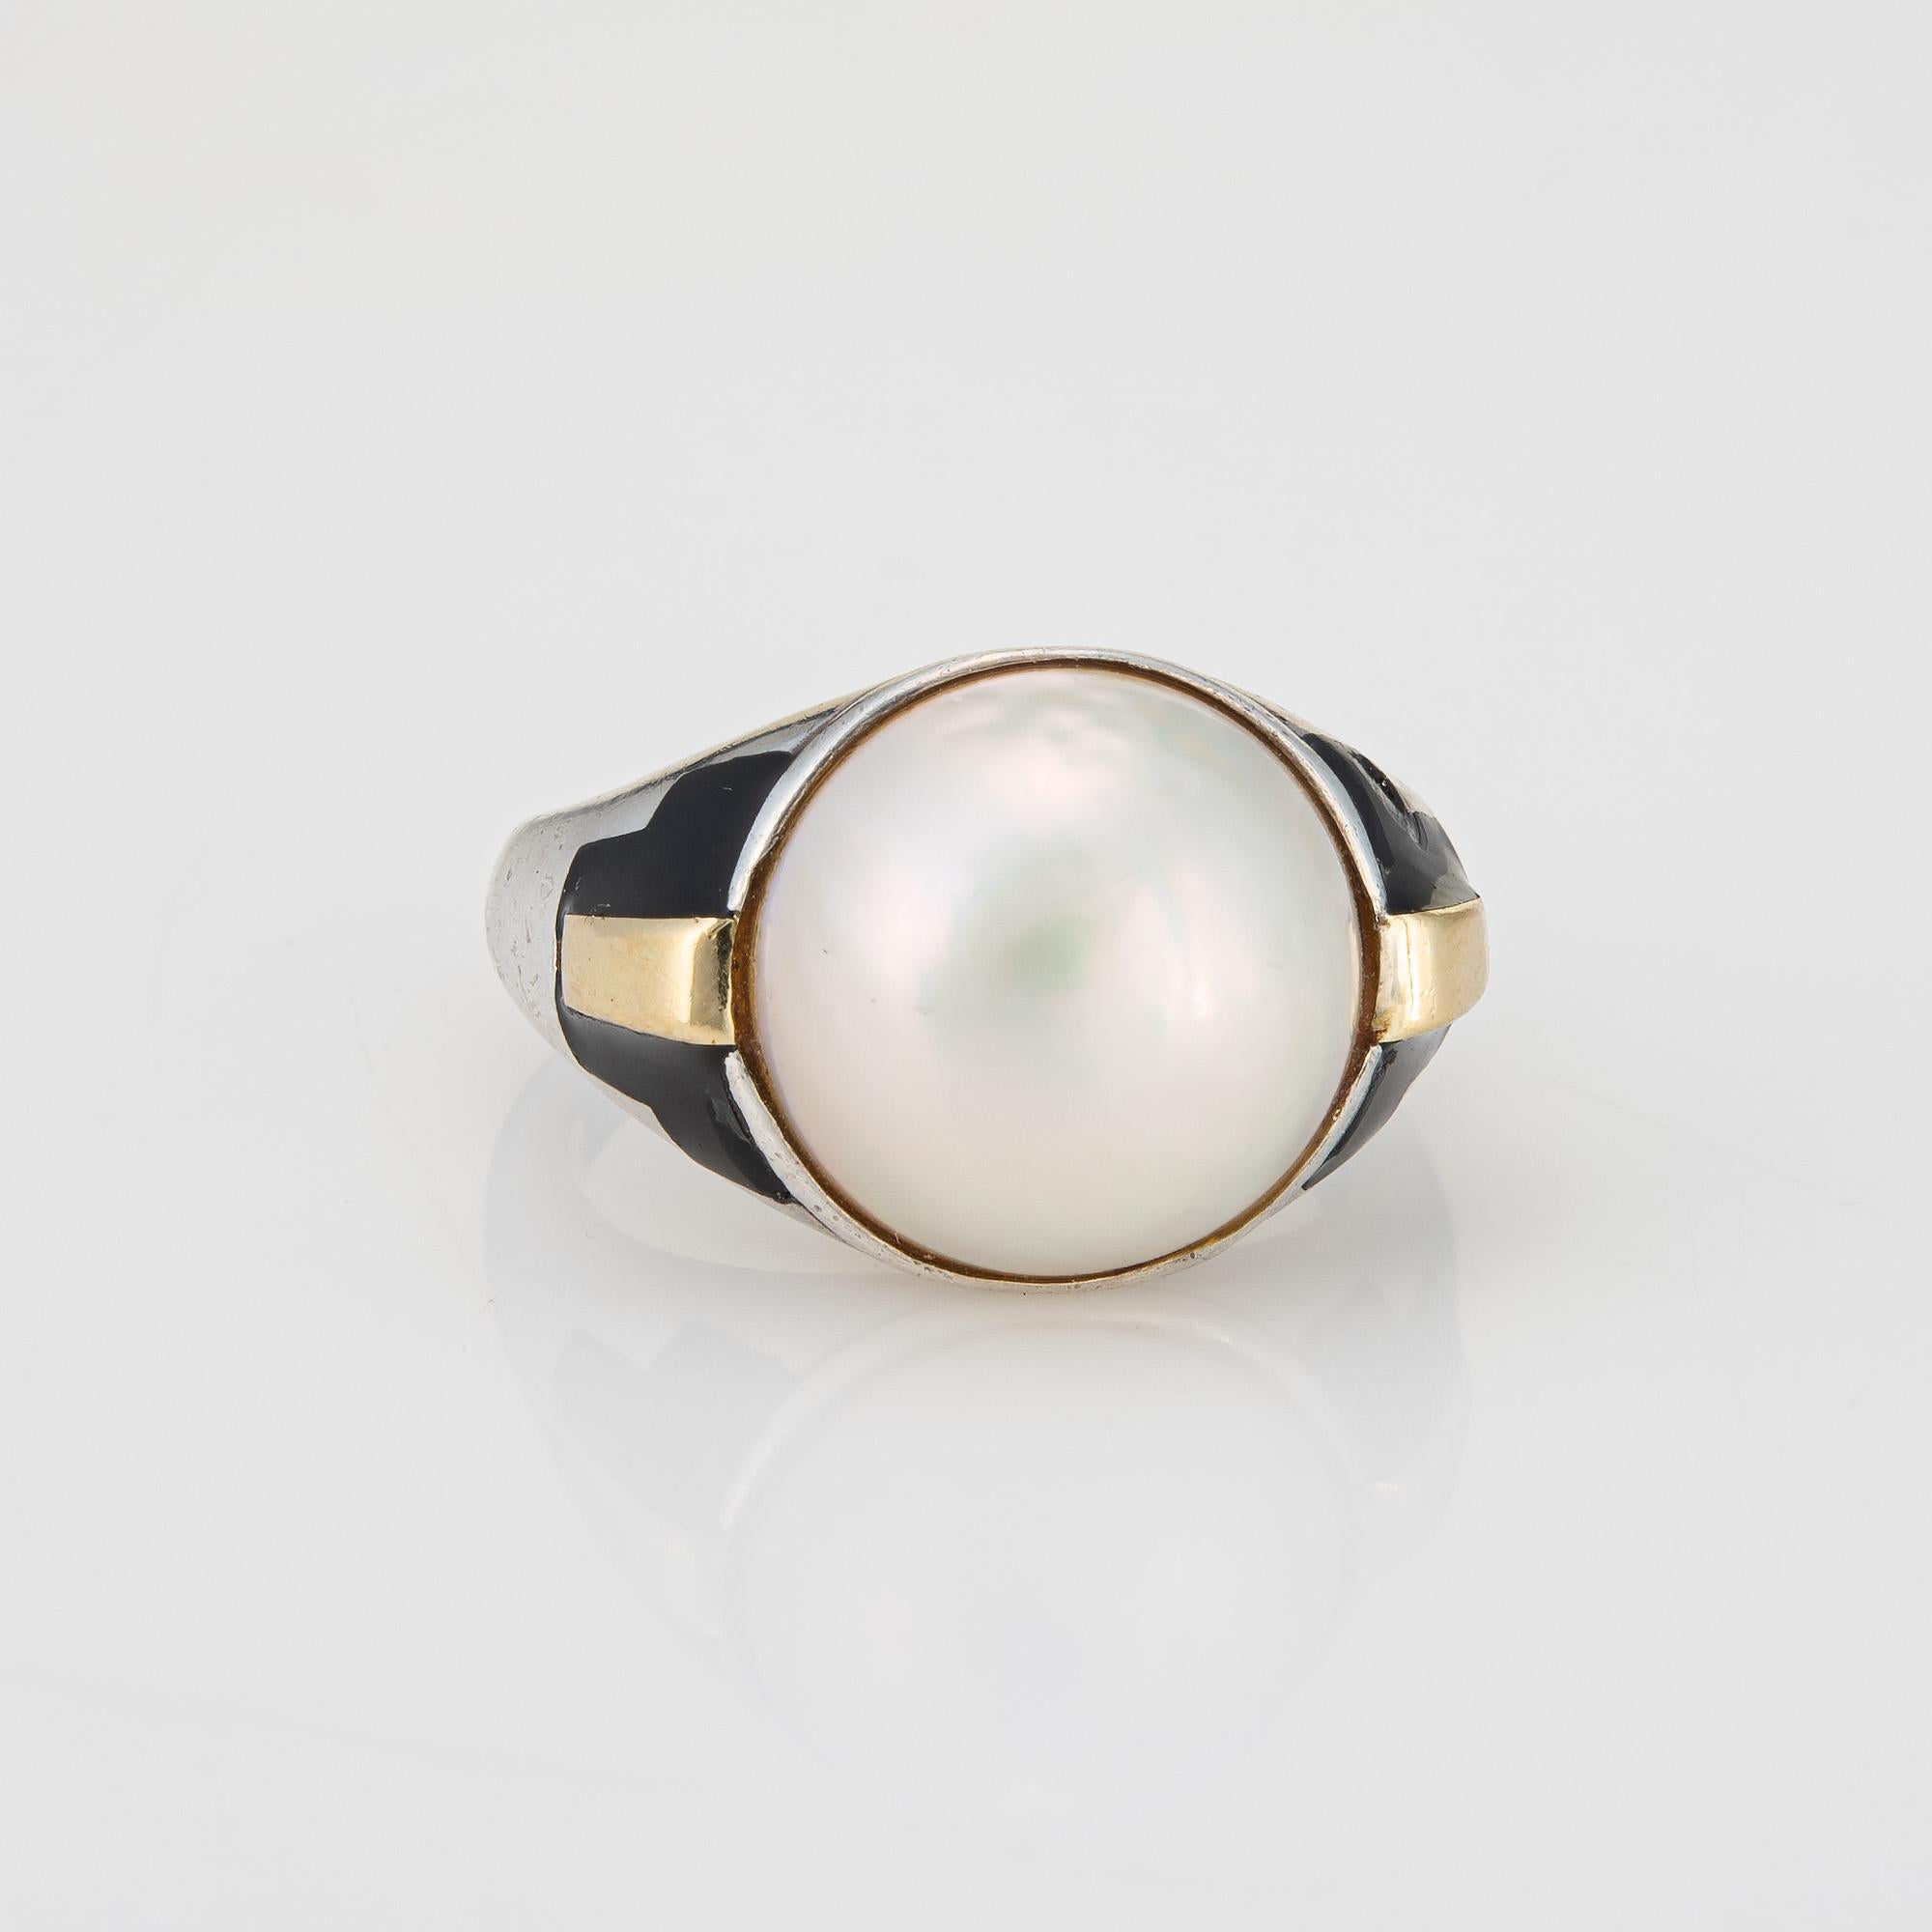 Stylish vintage Cartier Mabe pearl ring crafted in sterling silver and 18 karat yellow gold (circa 1970s).  

One 12.5mm Mabe pearl is set into the ring. The pearl exhibits a glossy luster with rose & green overtones. 
Designed in the Art Deco